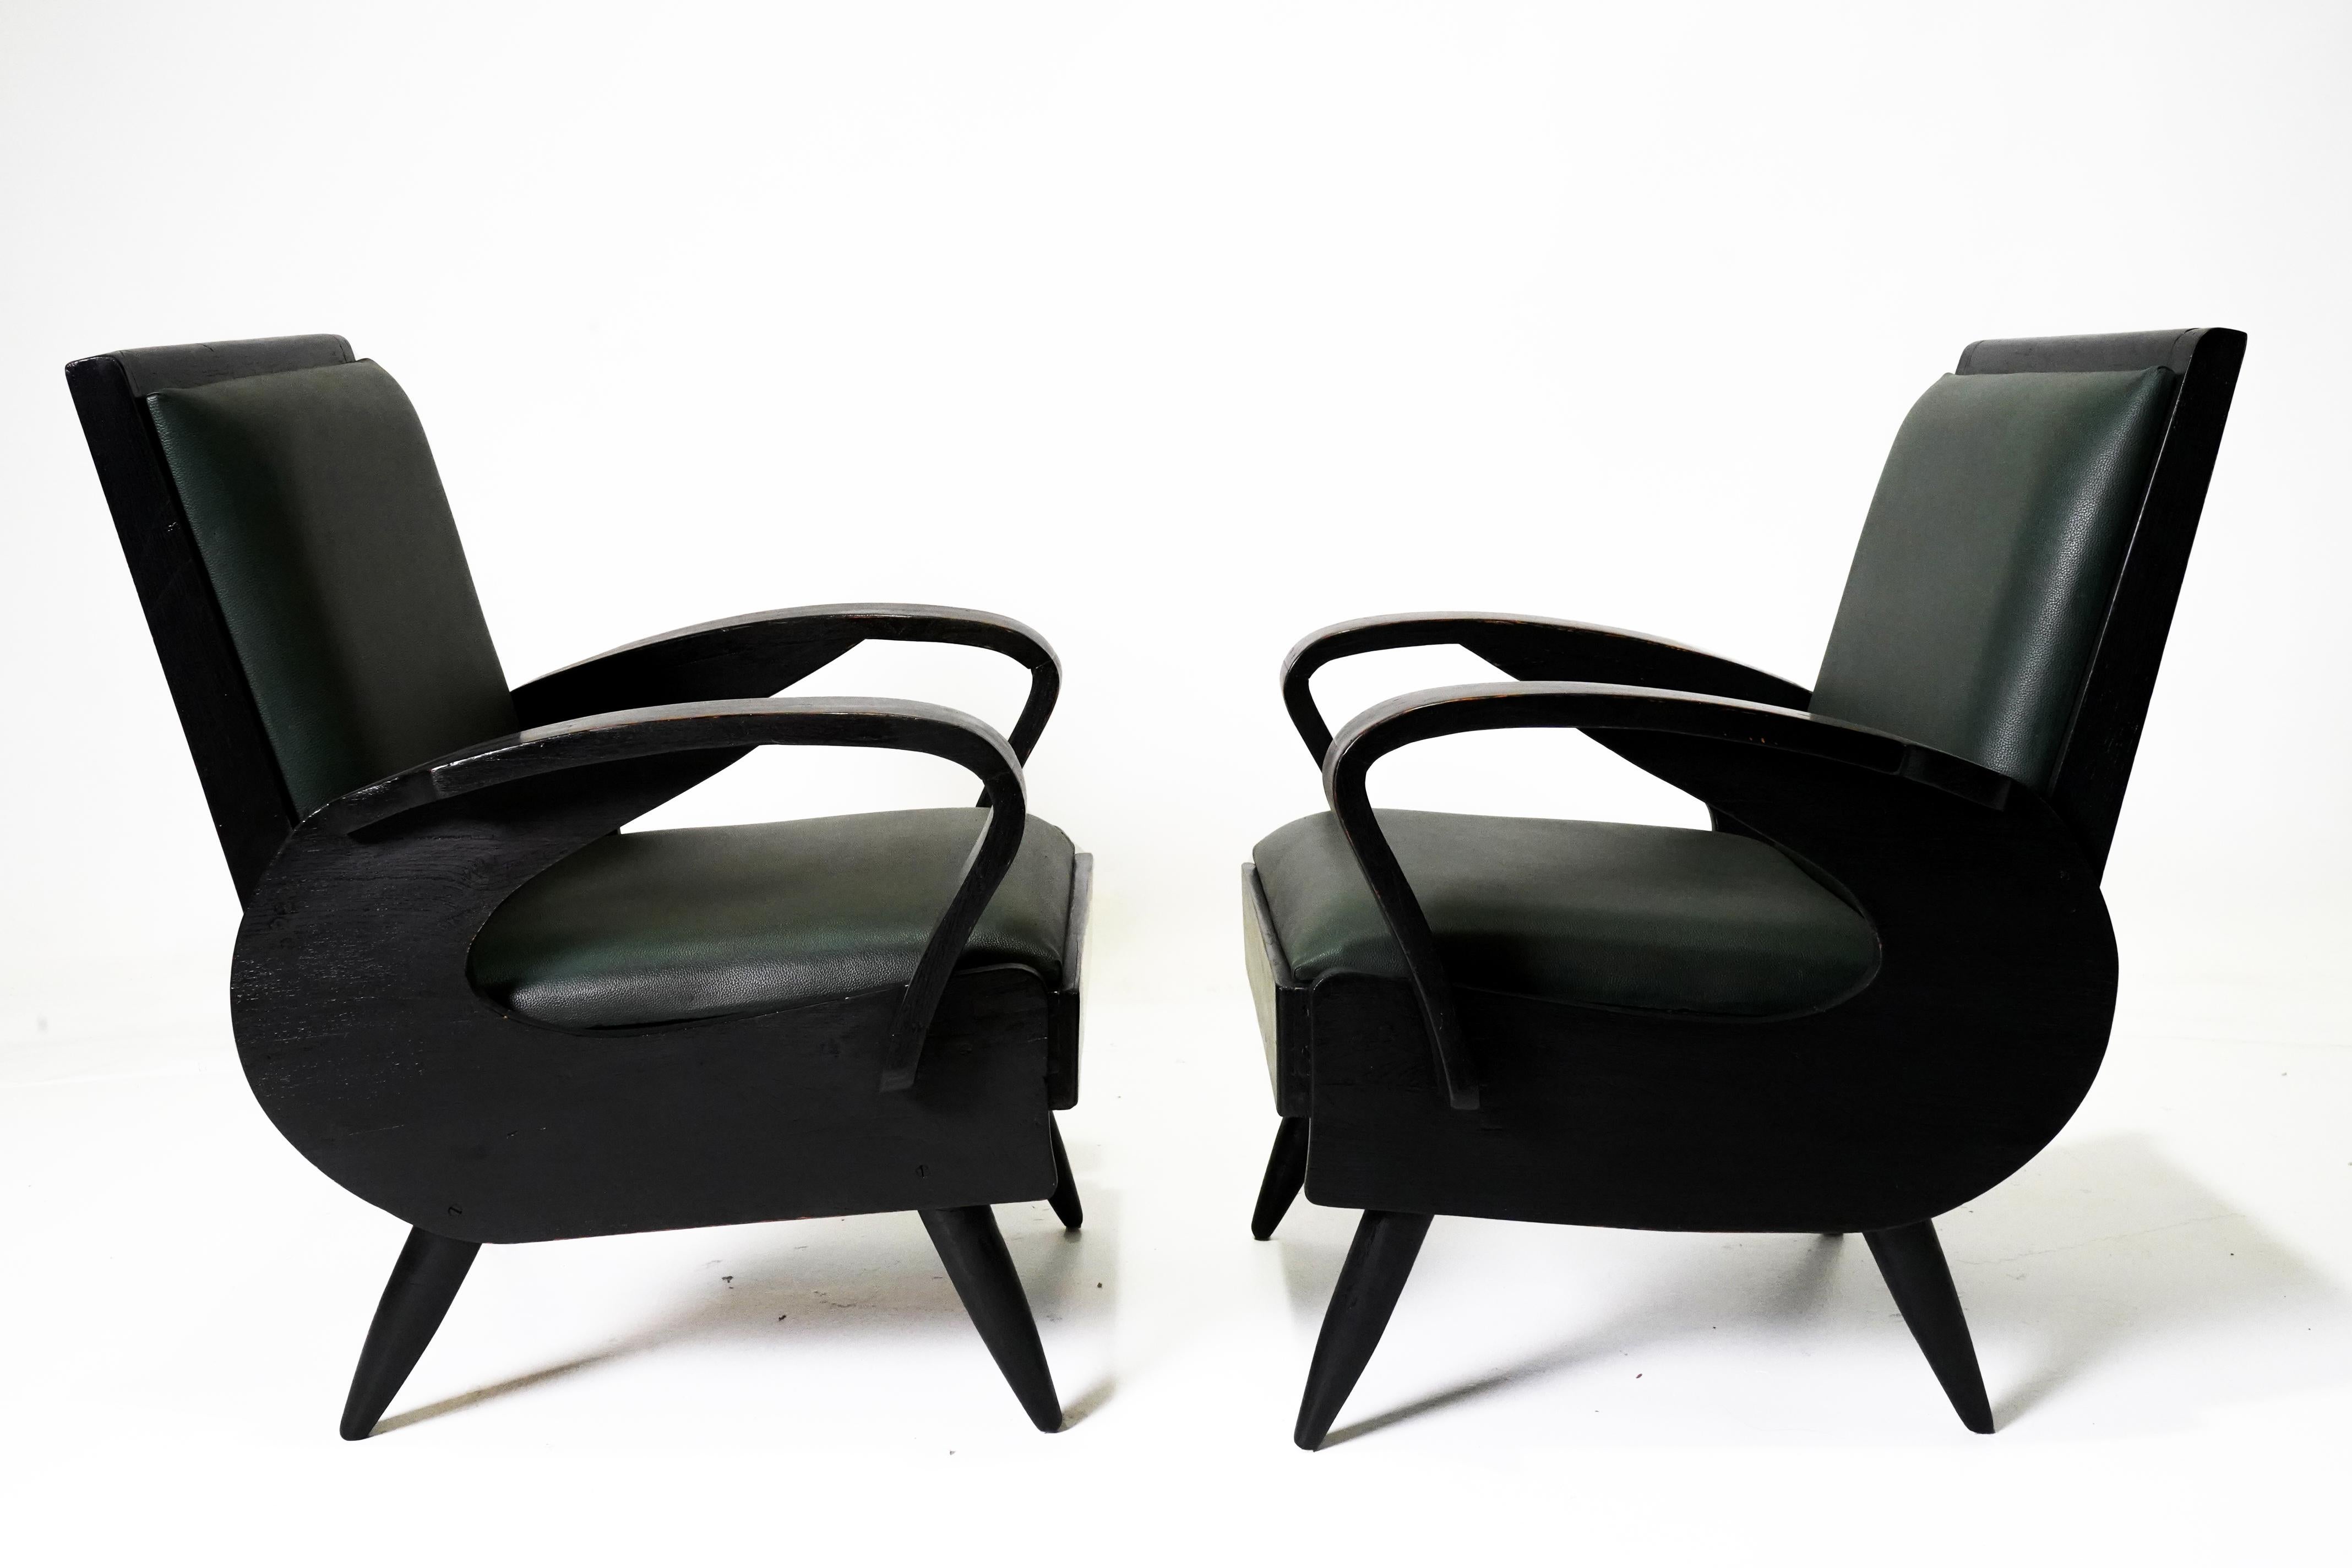 These Anglo-Indian lounge chairs date to the early 1950's and were made in the Mid-Century style.   During the British Colonial period and in the two decades after independence, much Indian furniture was made following British or European styles. 